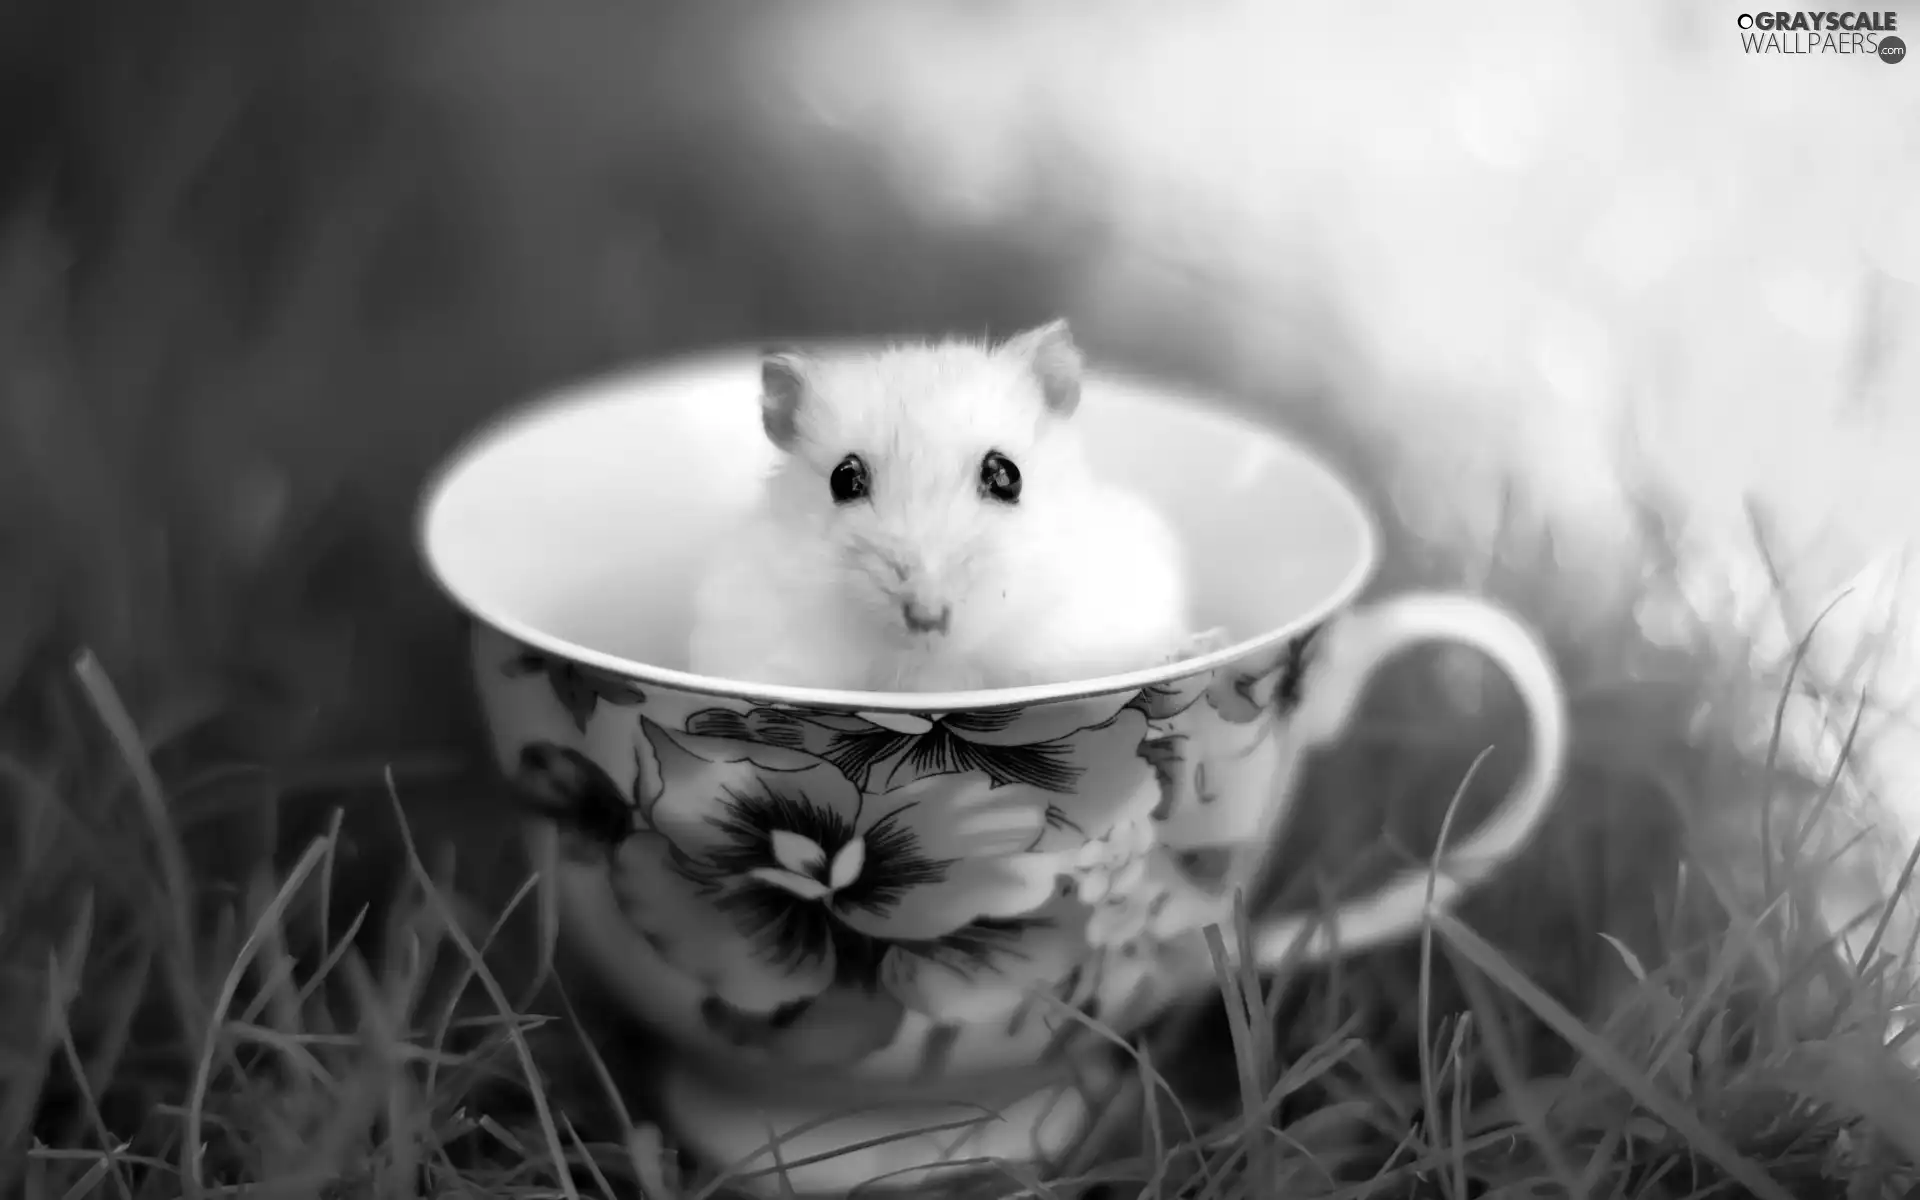 White, cup, grass, mouse